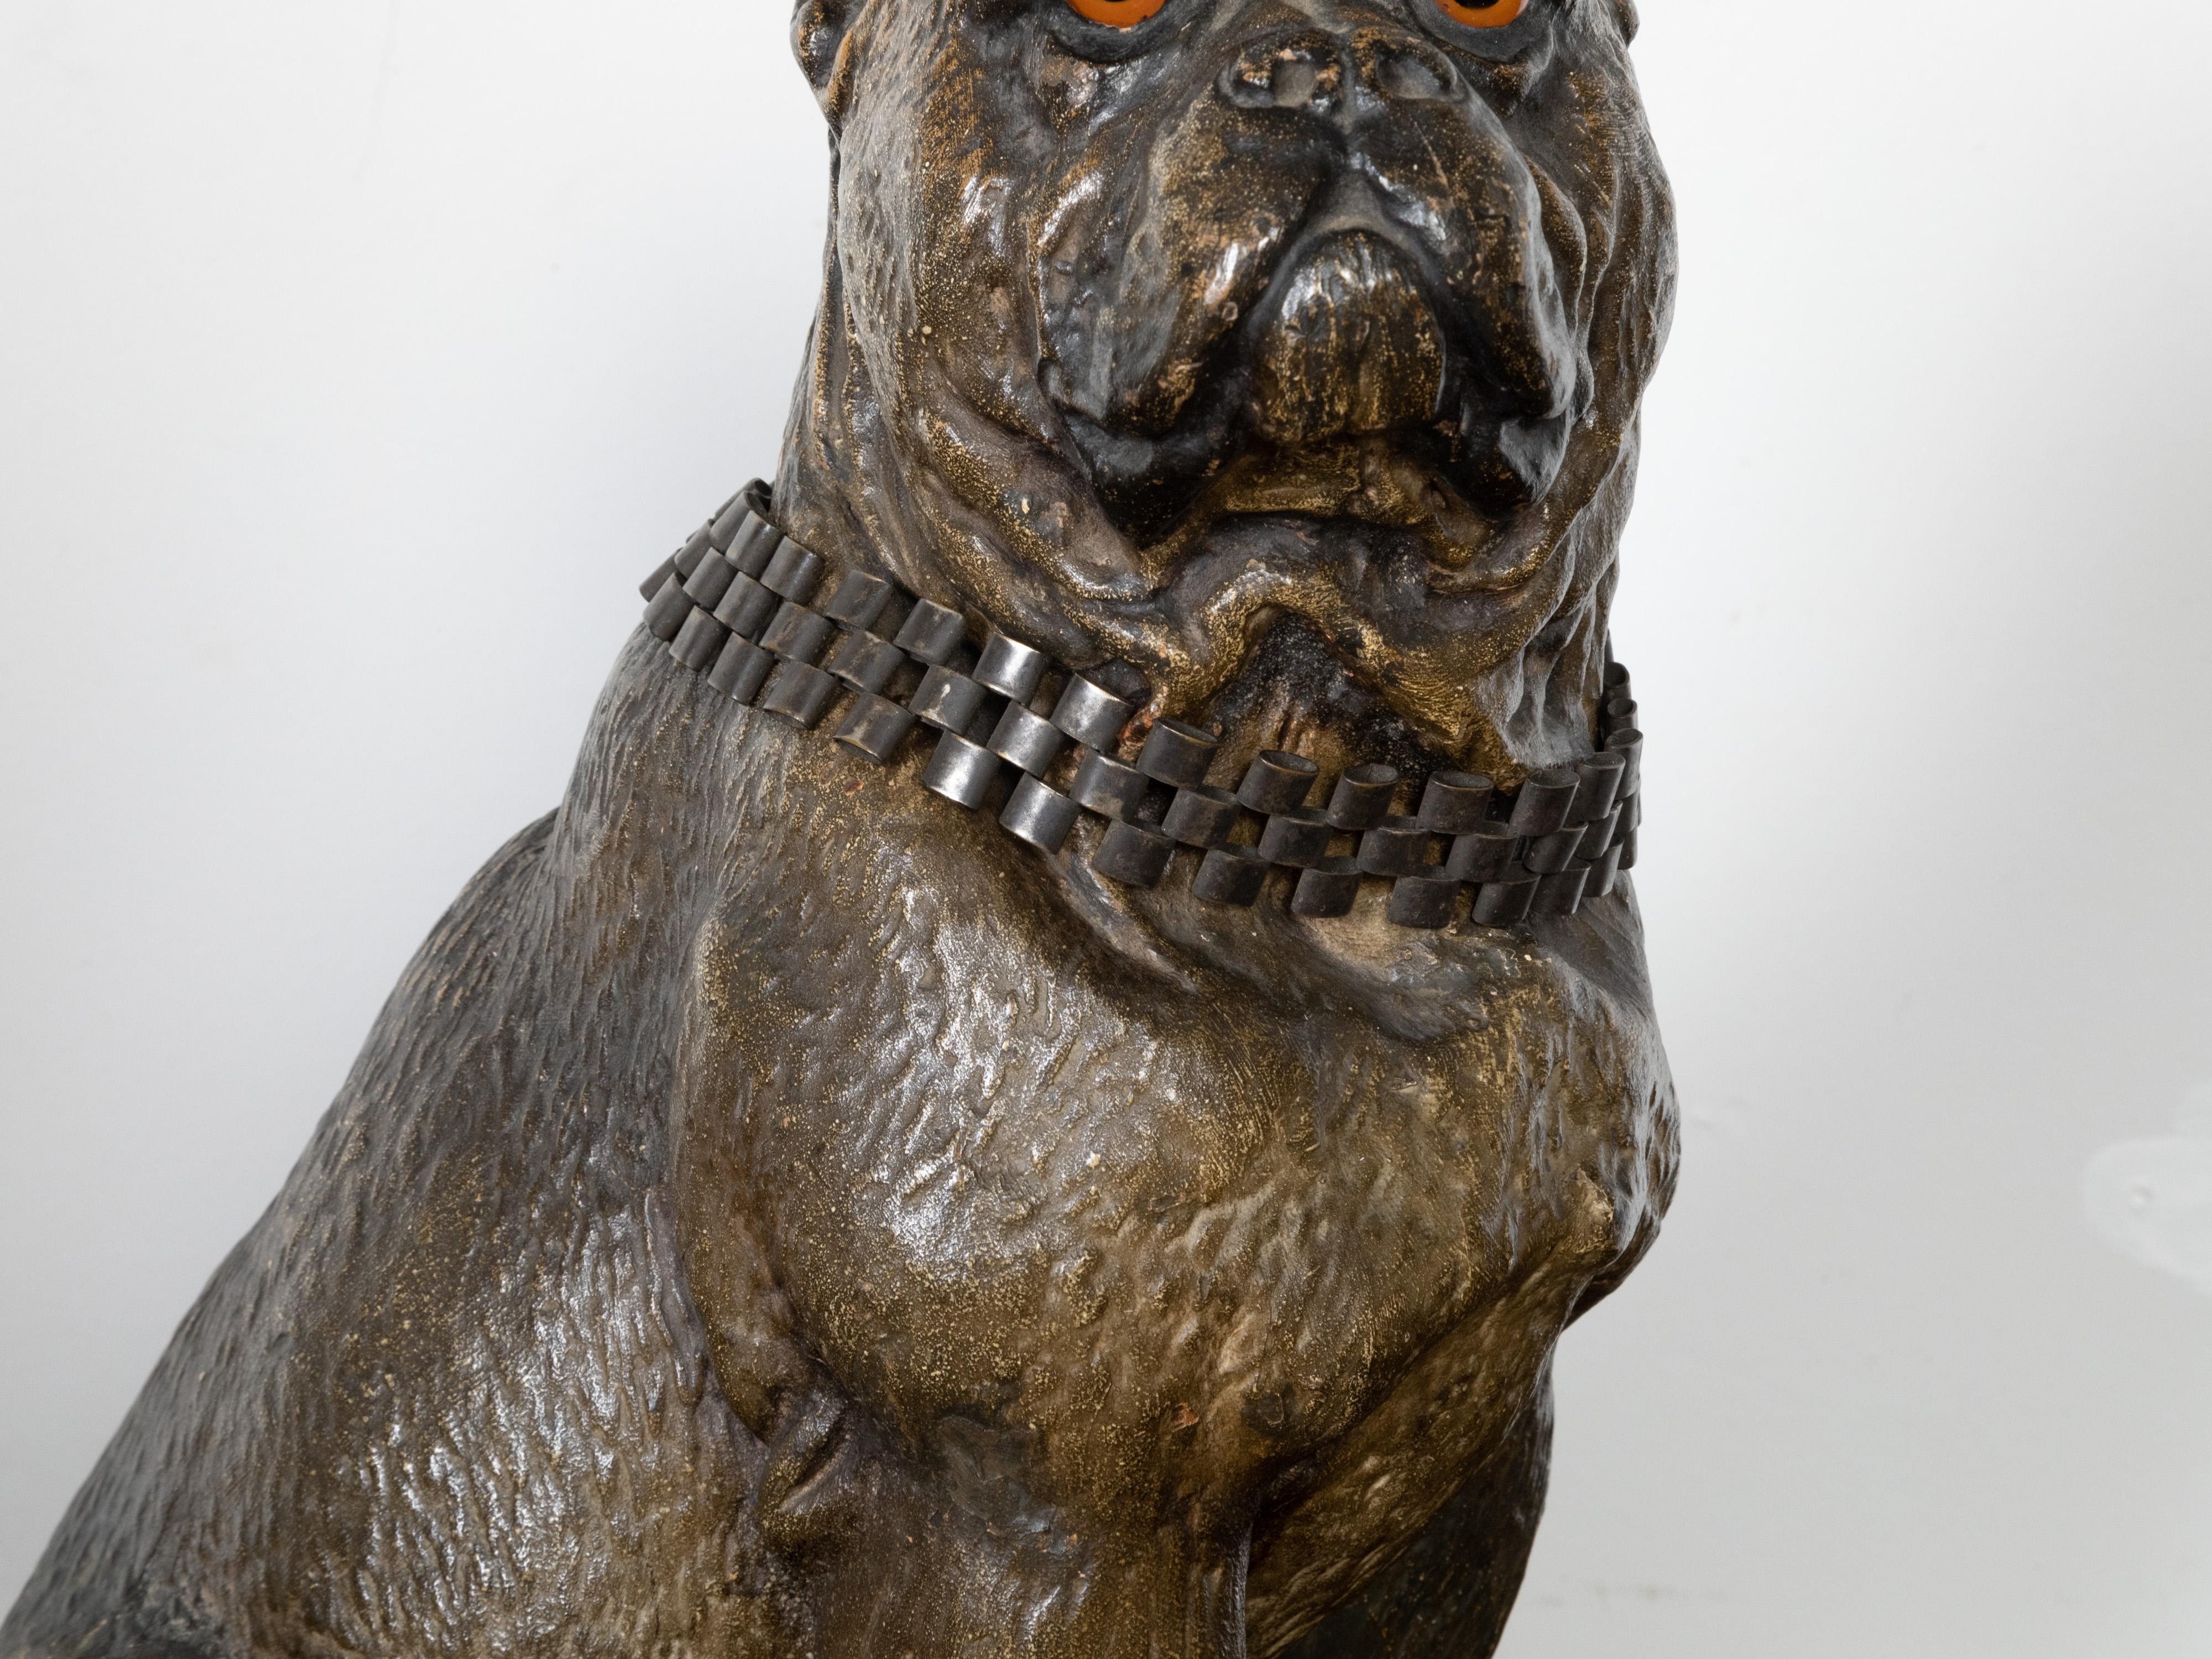 English 19th Century Terracotta Bulldog Statue with Silver Collar and Glass Eyes For Sale 4